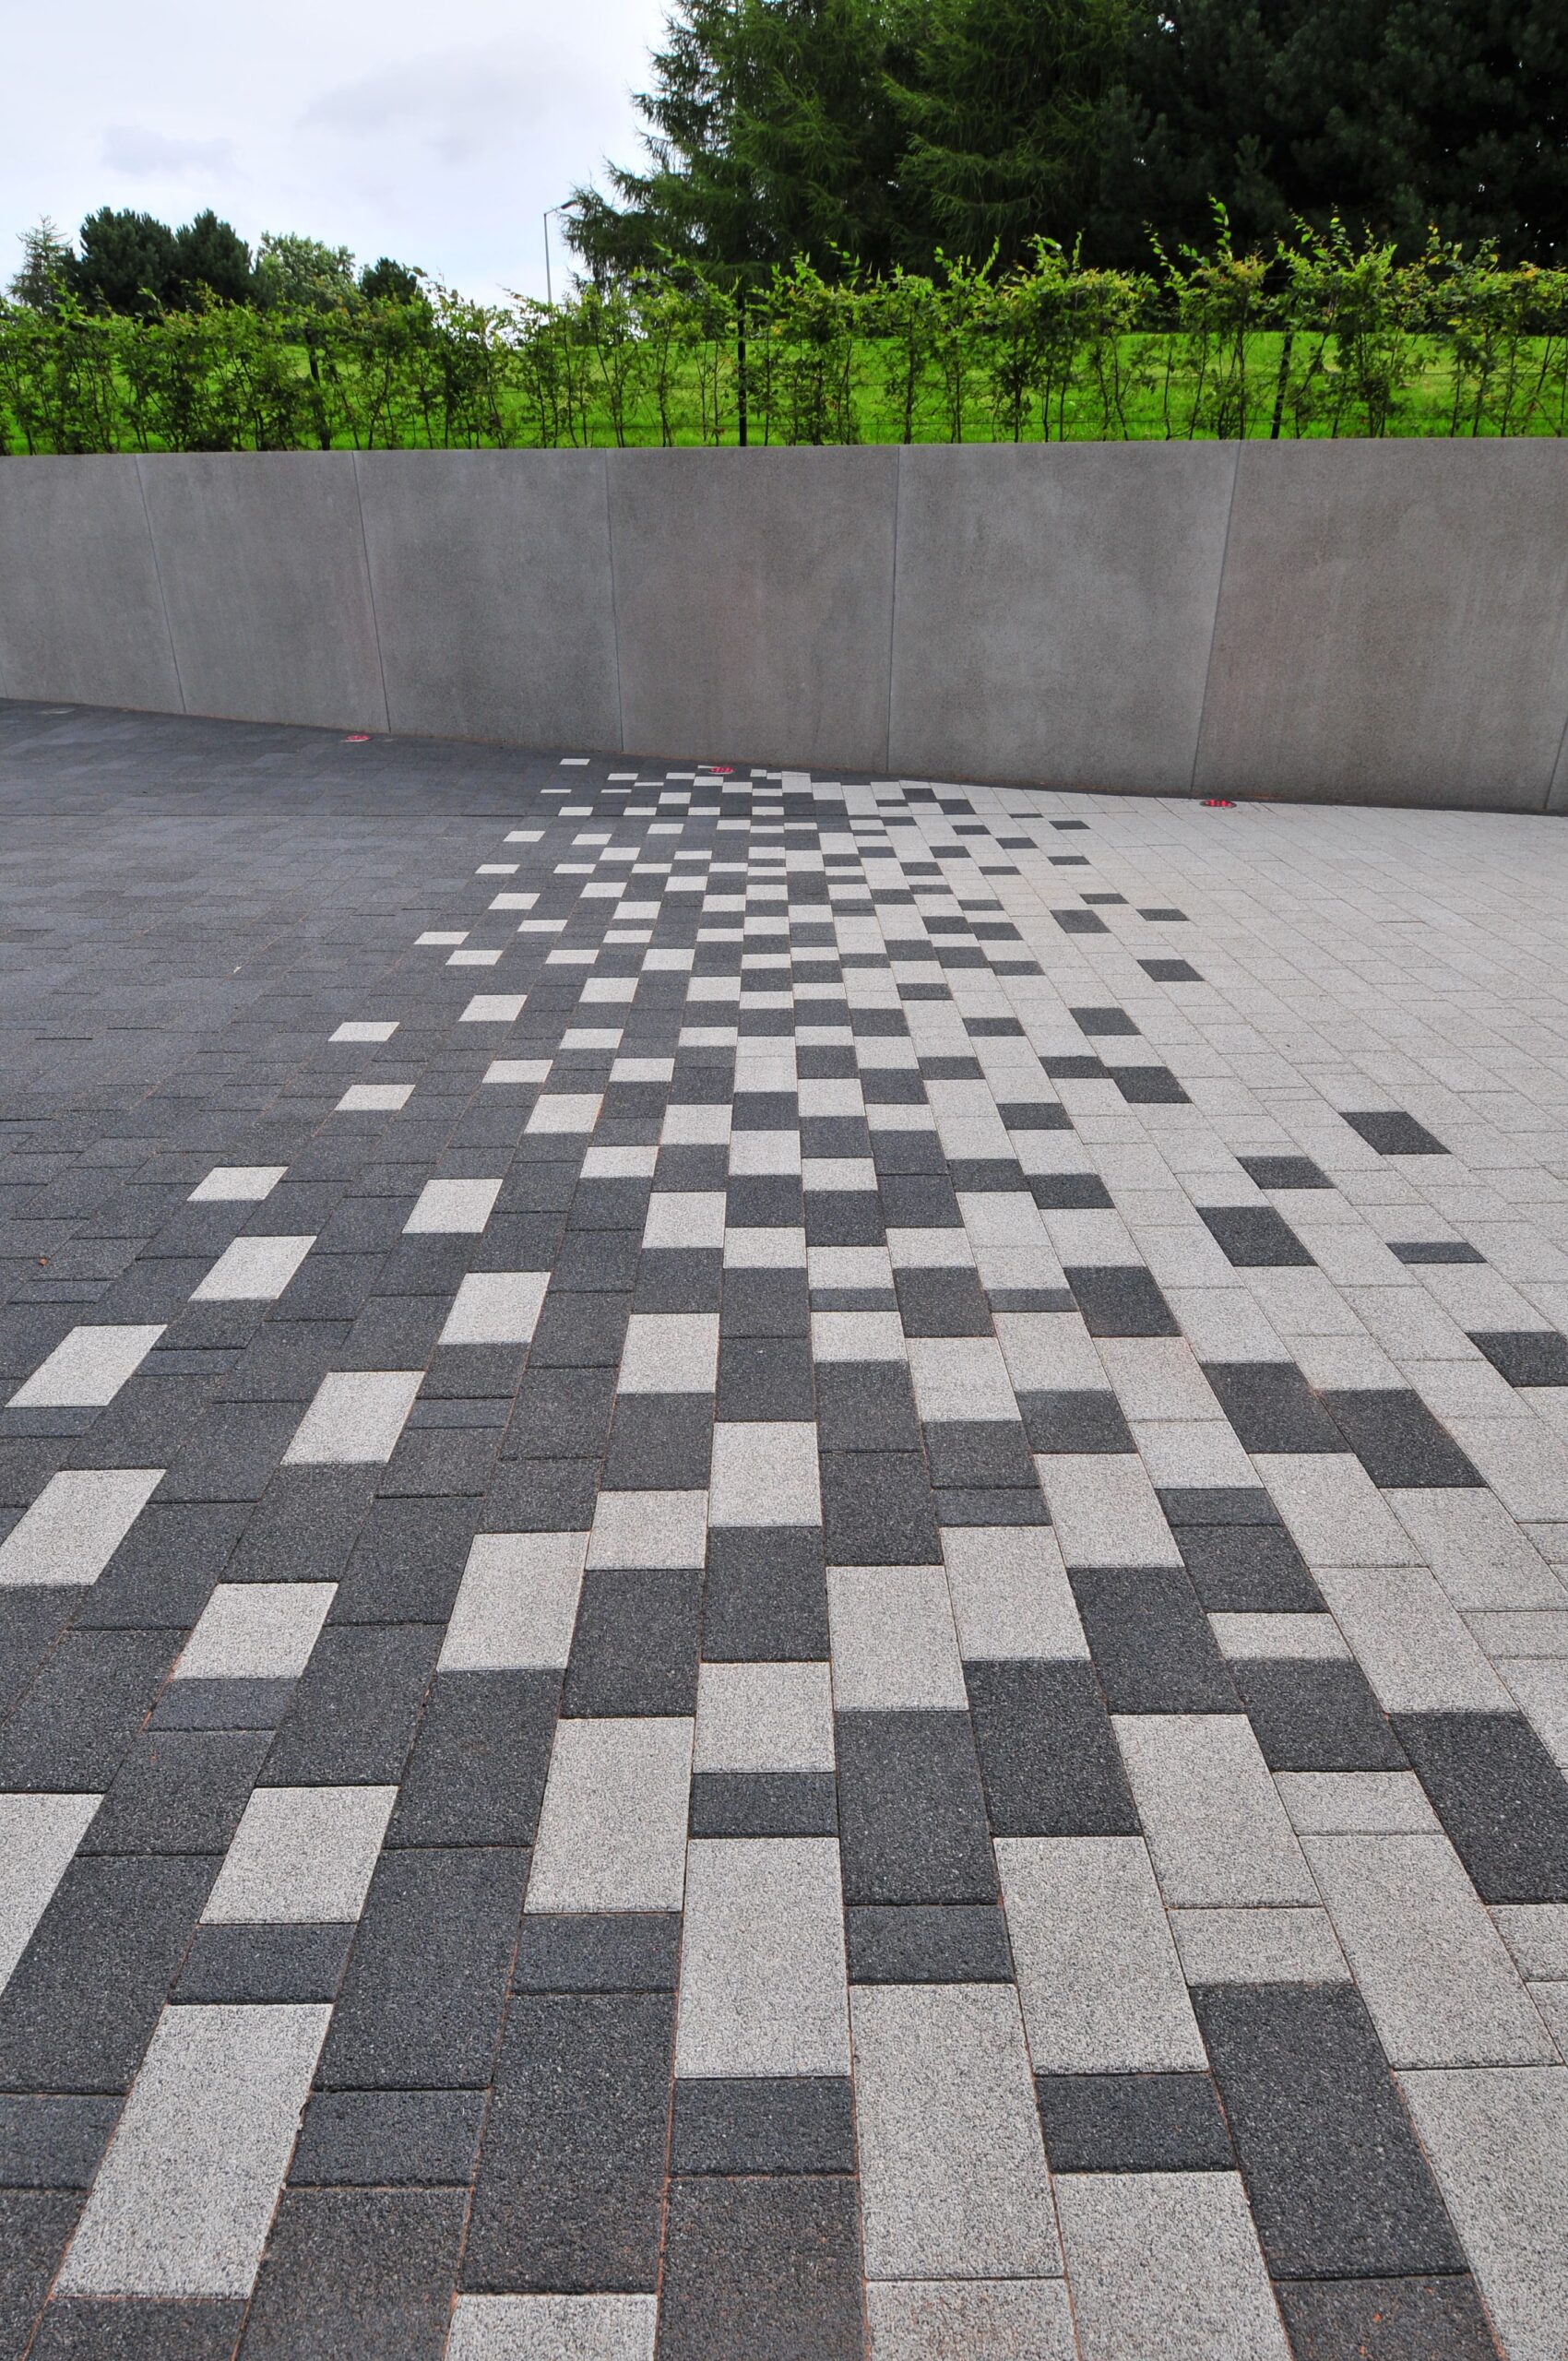 The Ultimate Guide to Interlocking
Pavers: Benefits, Installation, and Maintenance